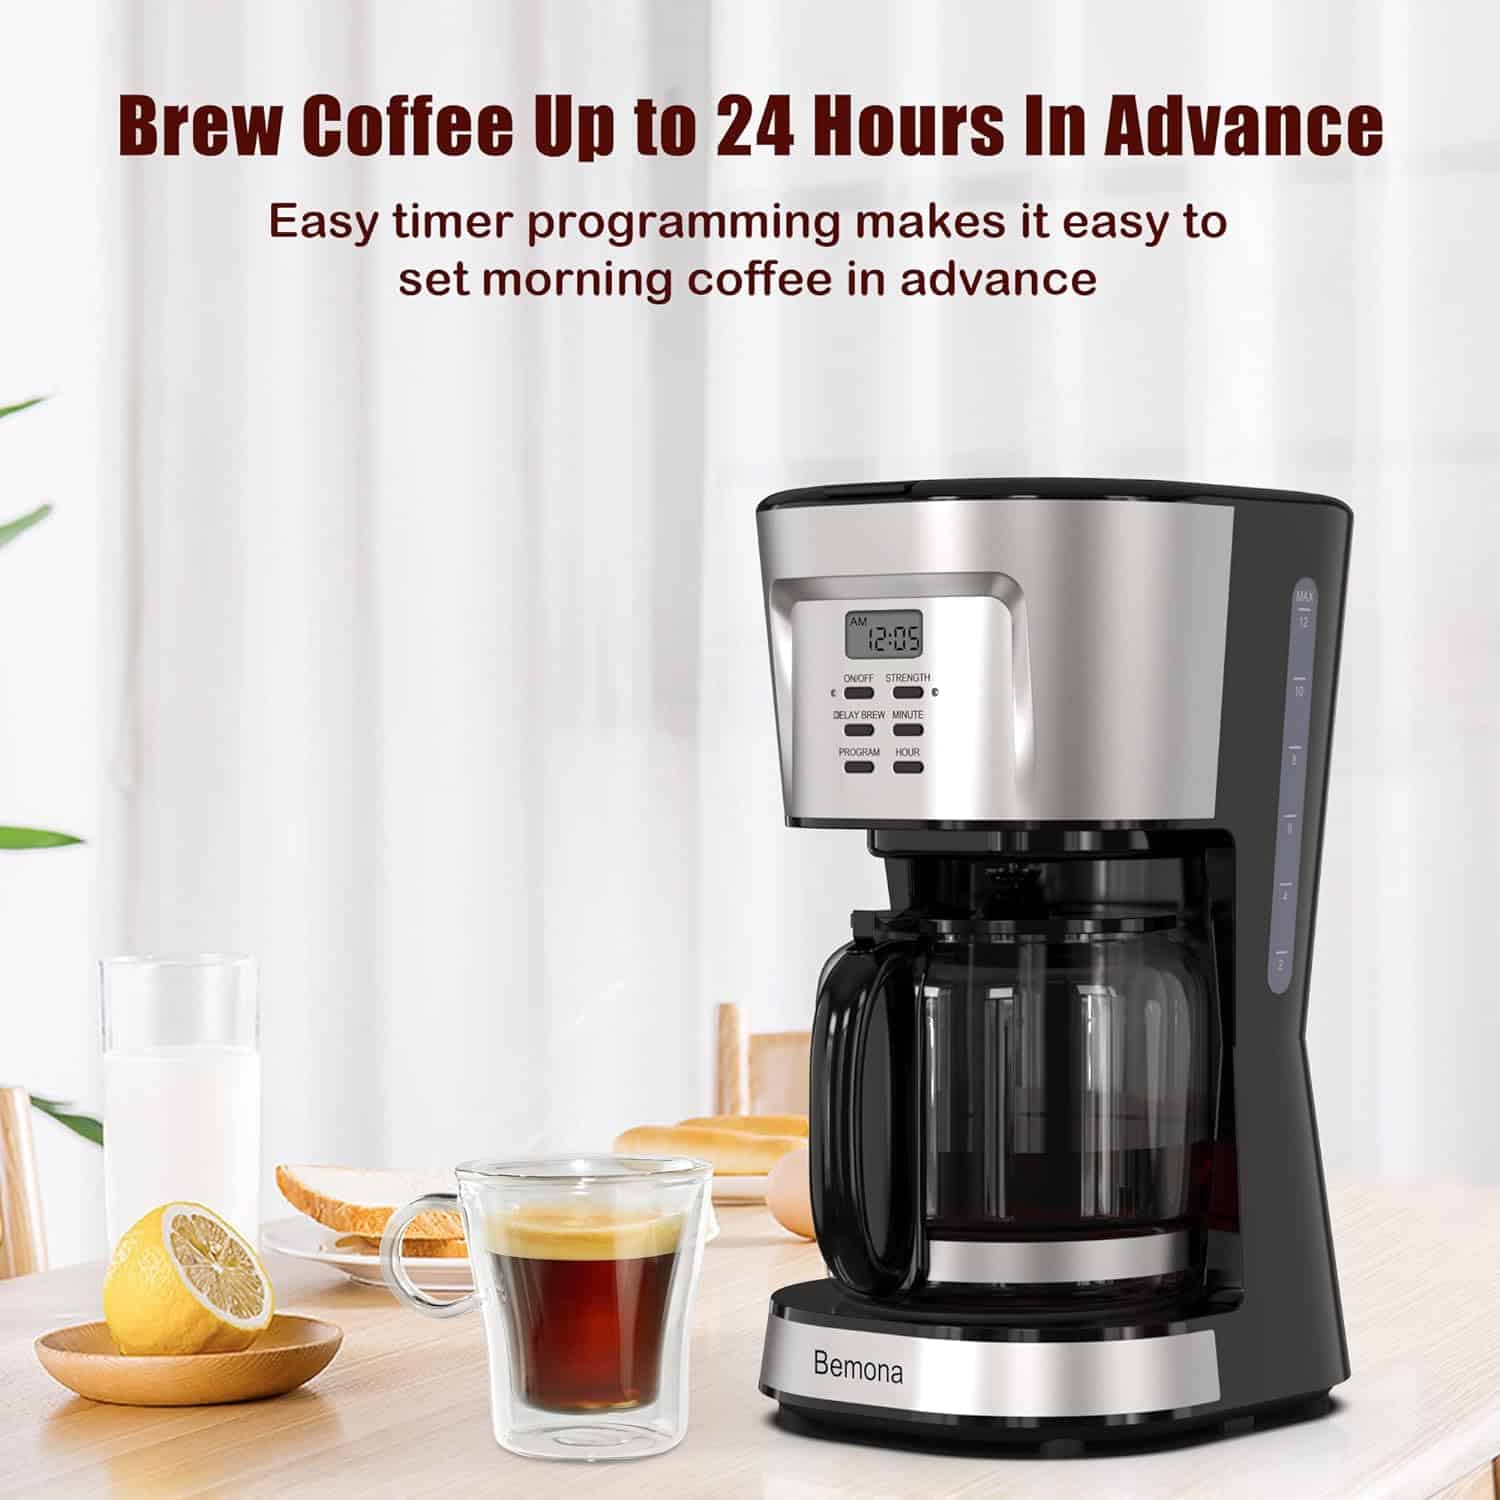 Bemona 12-Cup Brew Coffee Maker: The Perfect Programmable Drip Coffee Machine